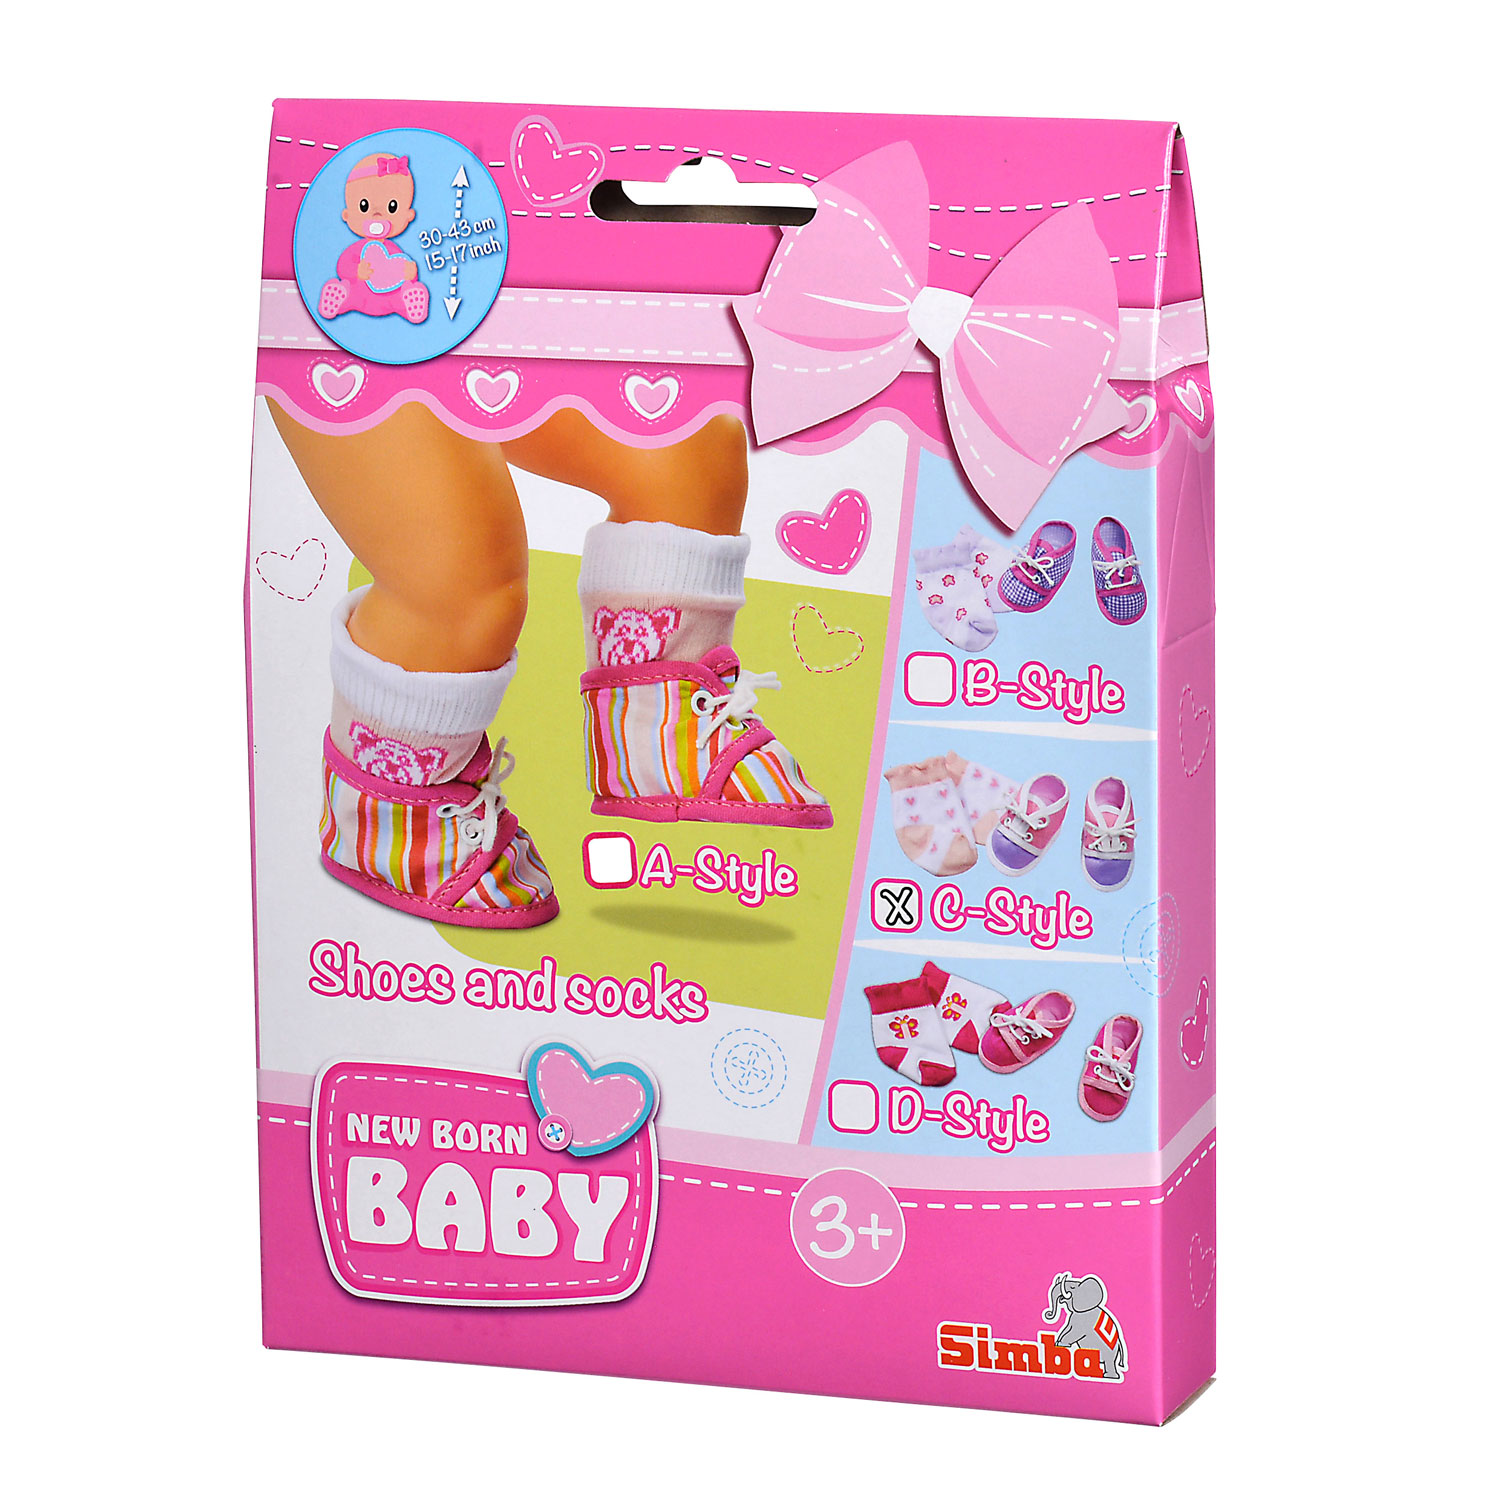 Chaussettes et chaussures New Born Baby violet-rose